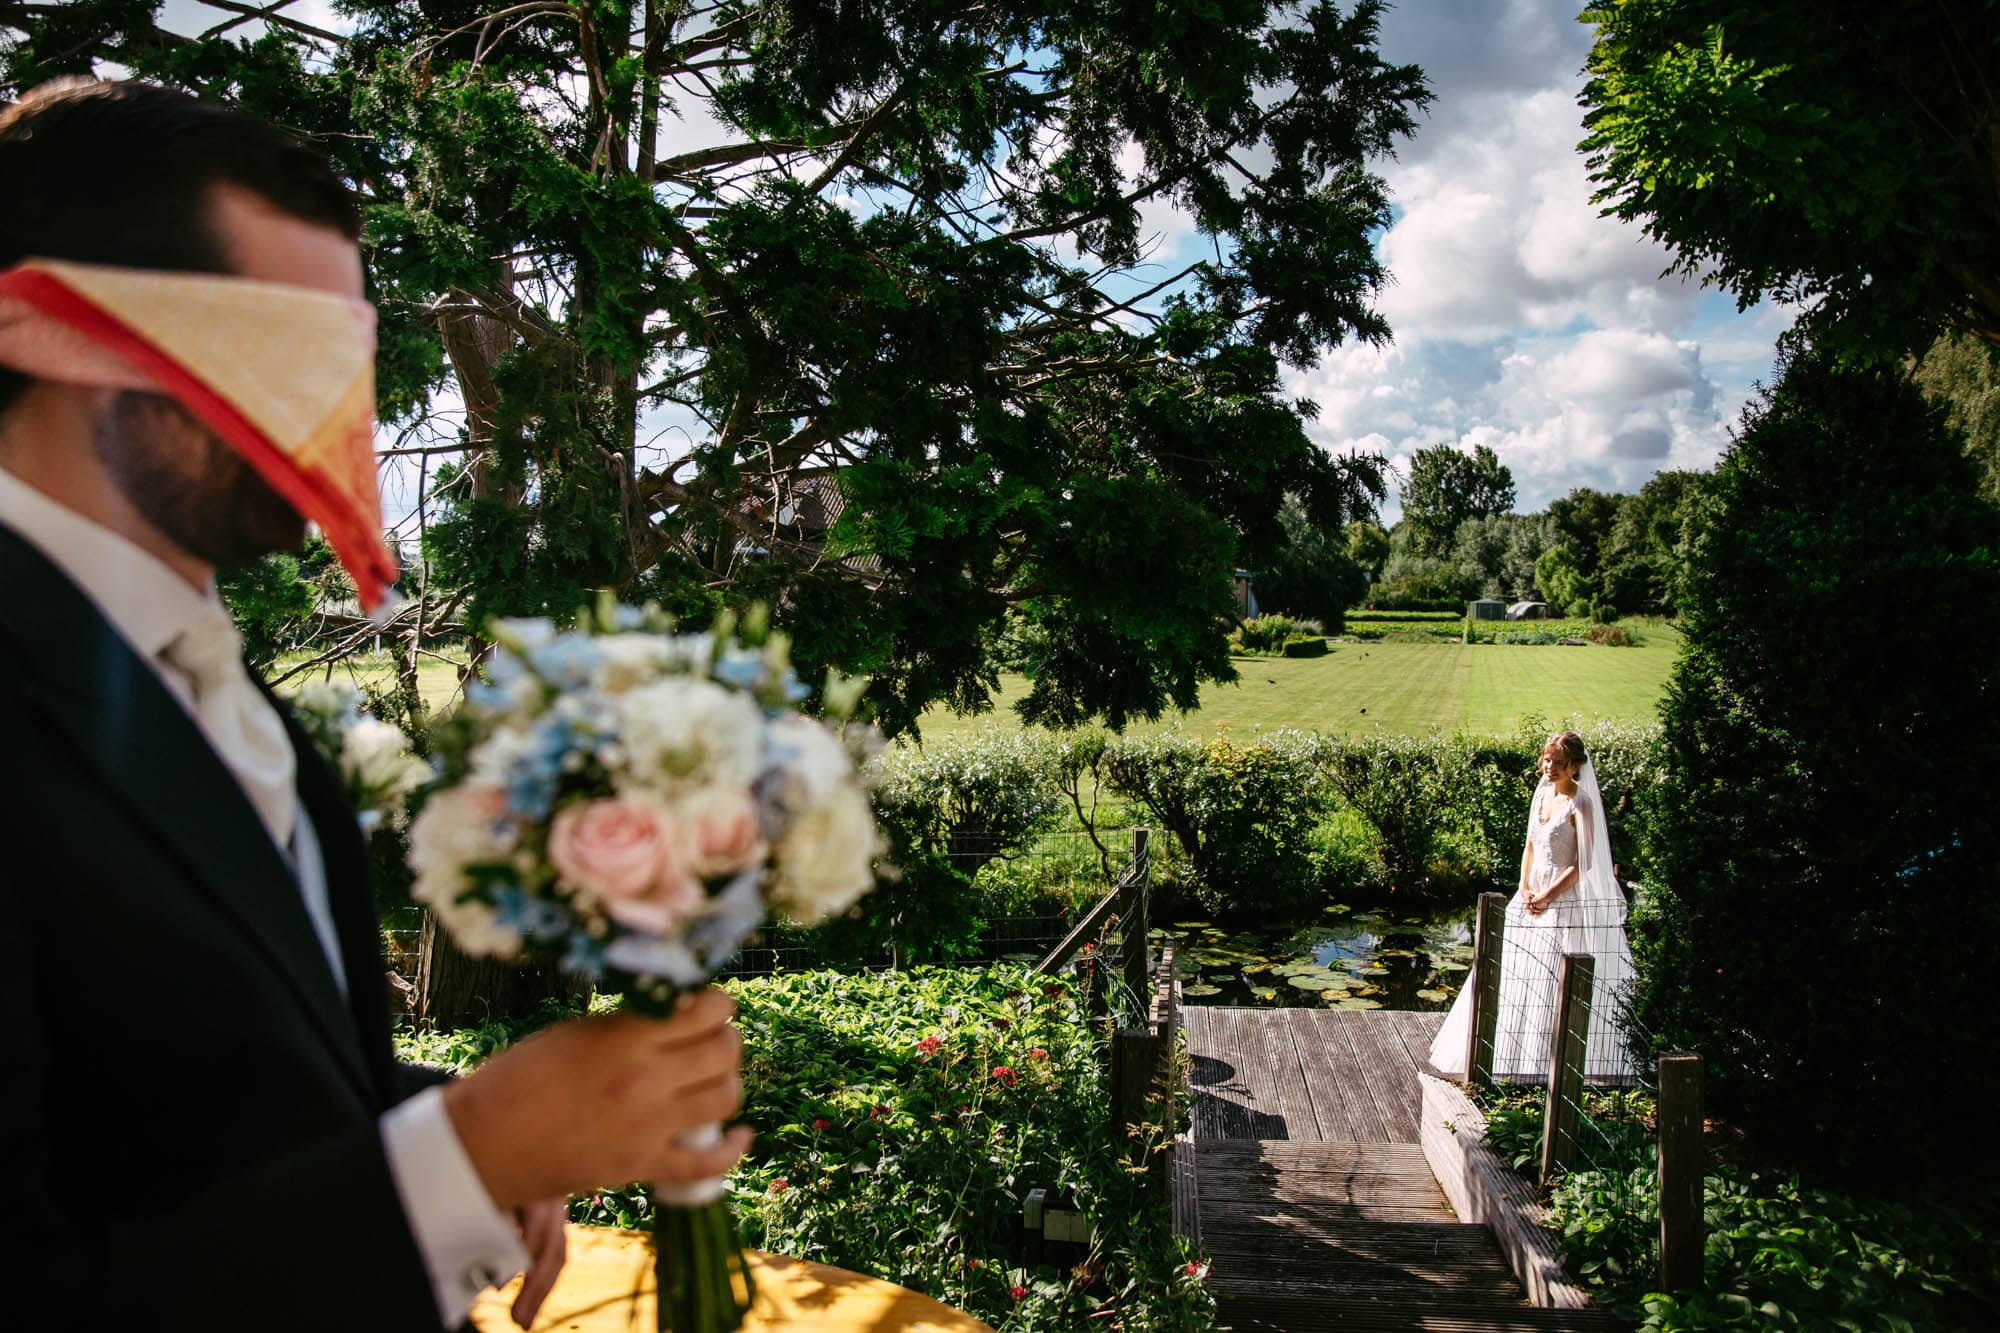 A bride and groom in an elegant A-line wedding dress holding a veil in front of a beautiful garden.